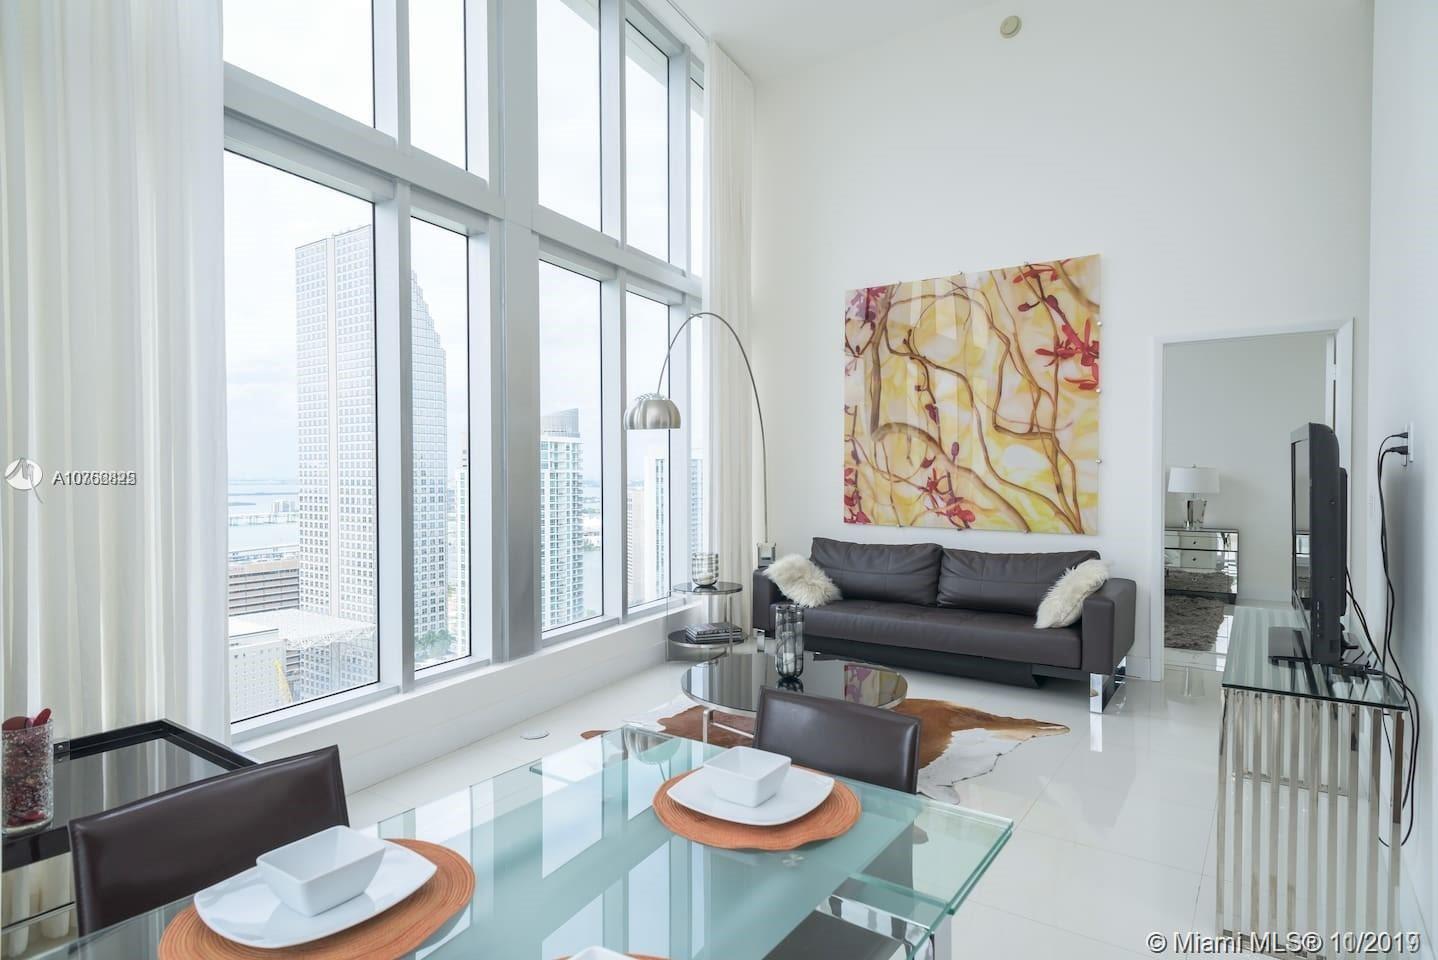 Available for short-term or seasonal rentals

16FT Ceilings & incredible views!! Very rare opportunity to rent this beautiful 2 Bedroom + 2 Bathroom featuring DOUBLE HEIGHT ceilings at the W Miami Residential section located in the heart of Brickell. Only a few floors feature ceilings this high

Fully furnished by Tui Lifestyle, Top-of-the-line appliances, curtains throughout & blackout blinds in the bedrooms, move-in ready.

The monthly rates reflected are for an annual lease. For availability, short term or seasonal rates please TEXT listing agent.